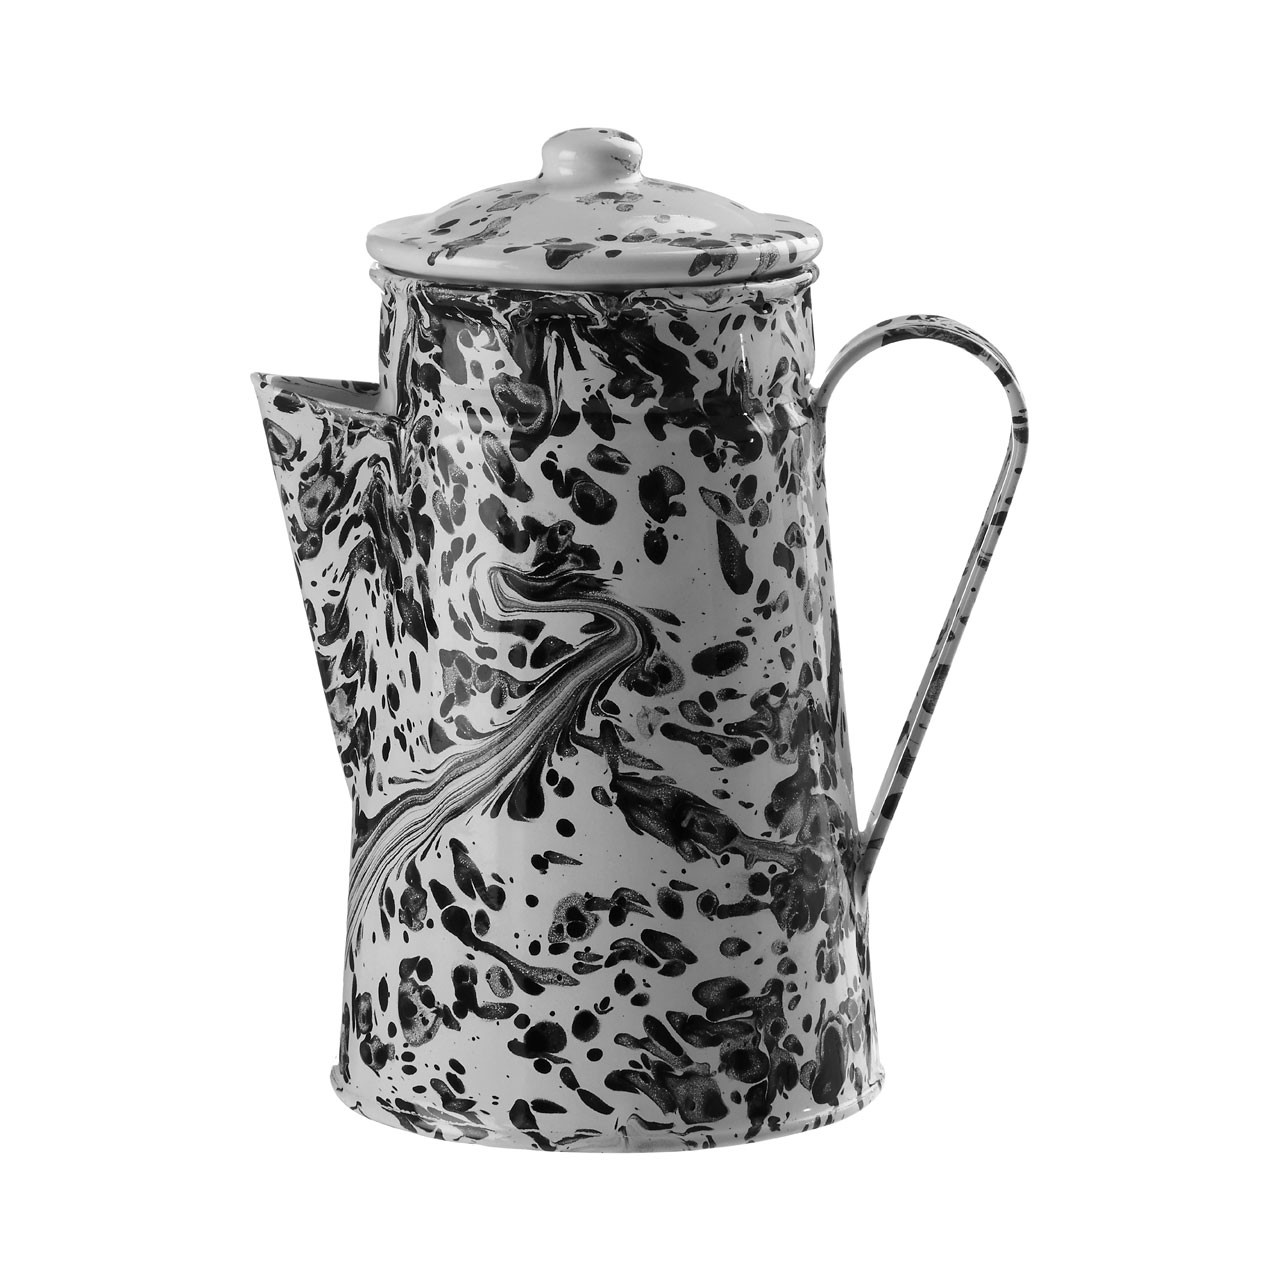 Hygge Black And White Patterned Coffee Pot - Click Image to Close